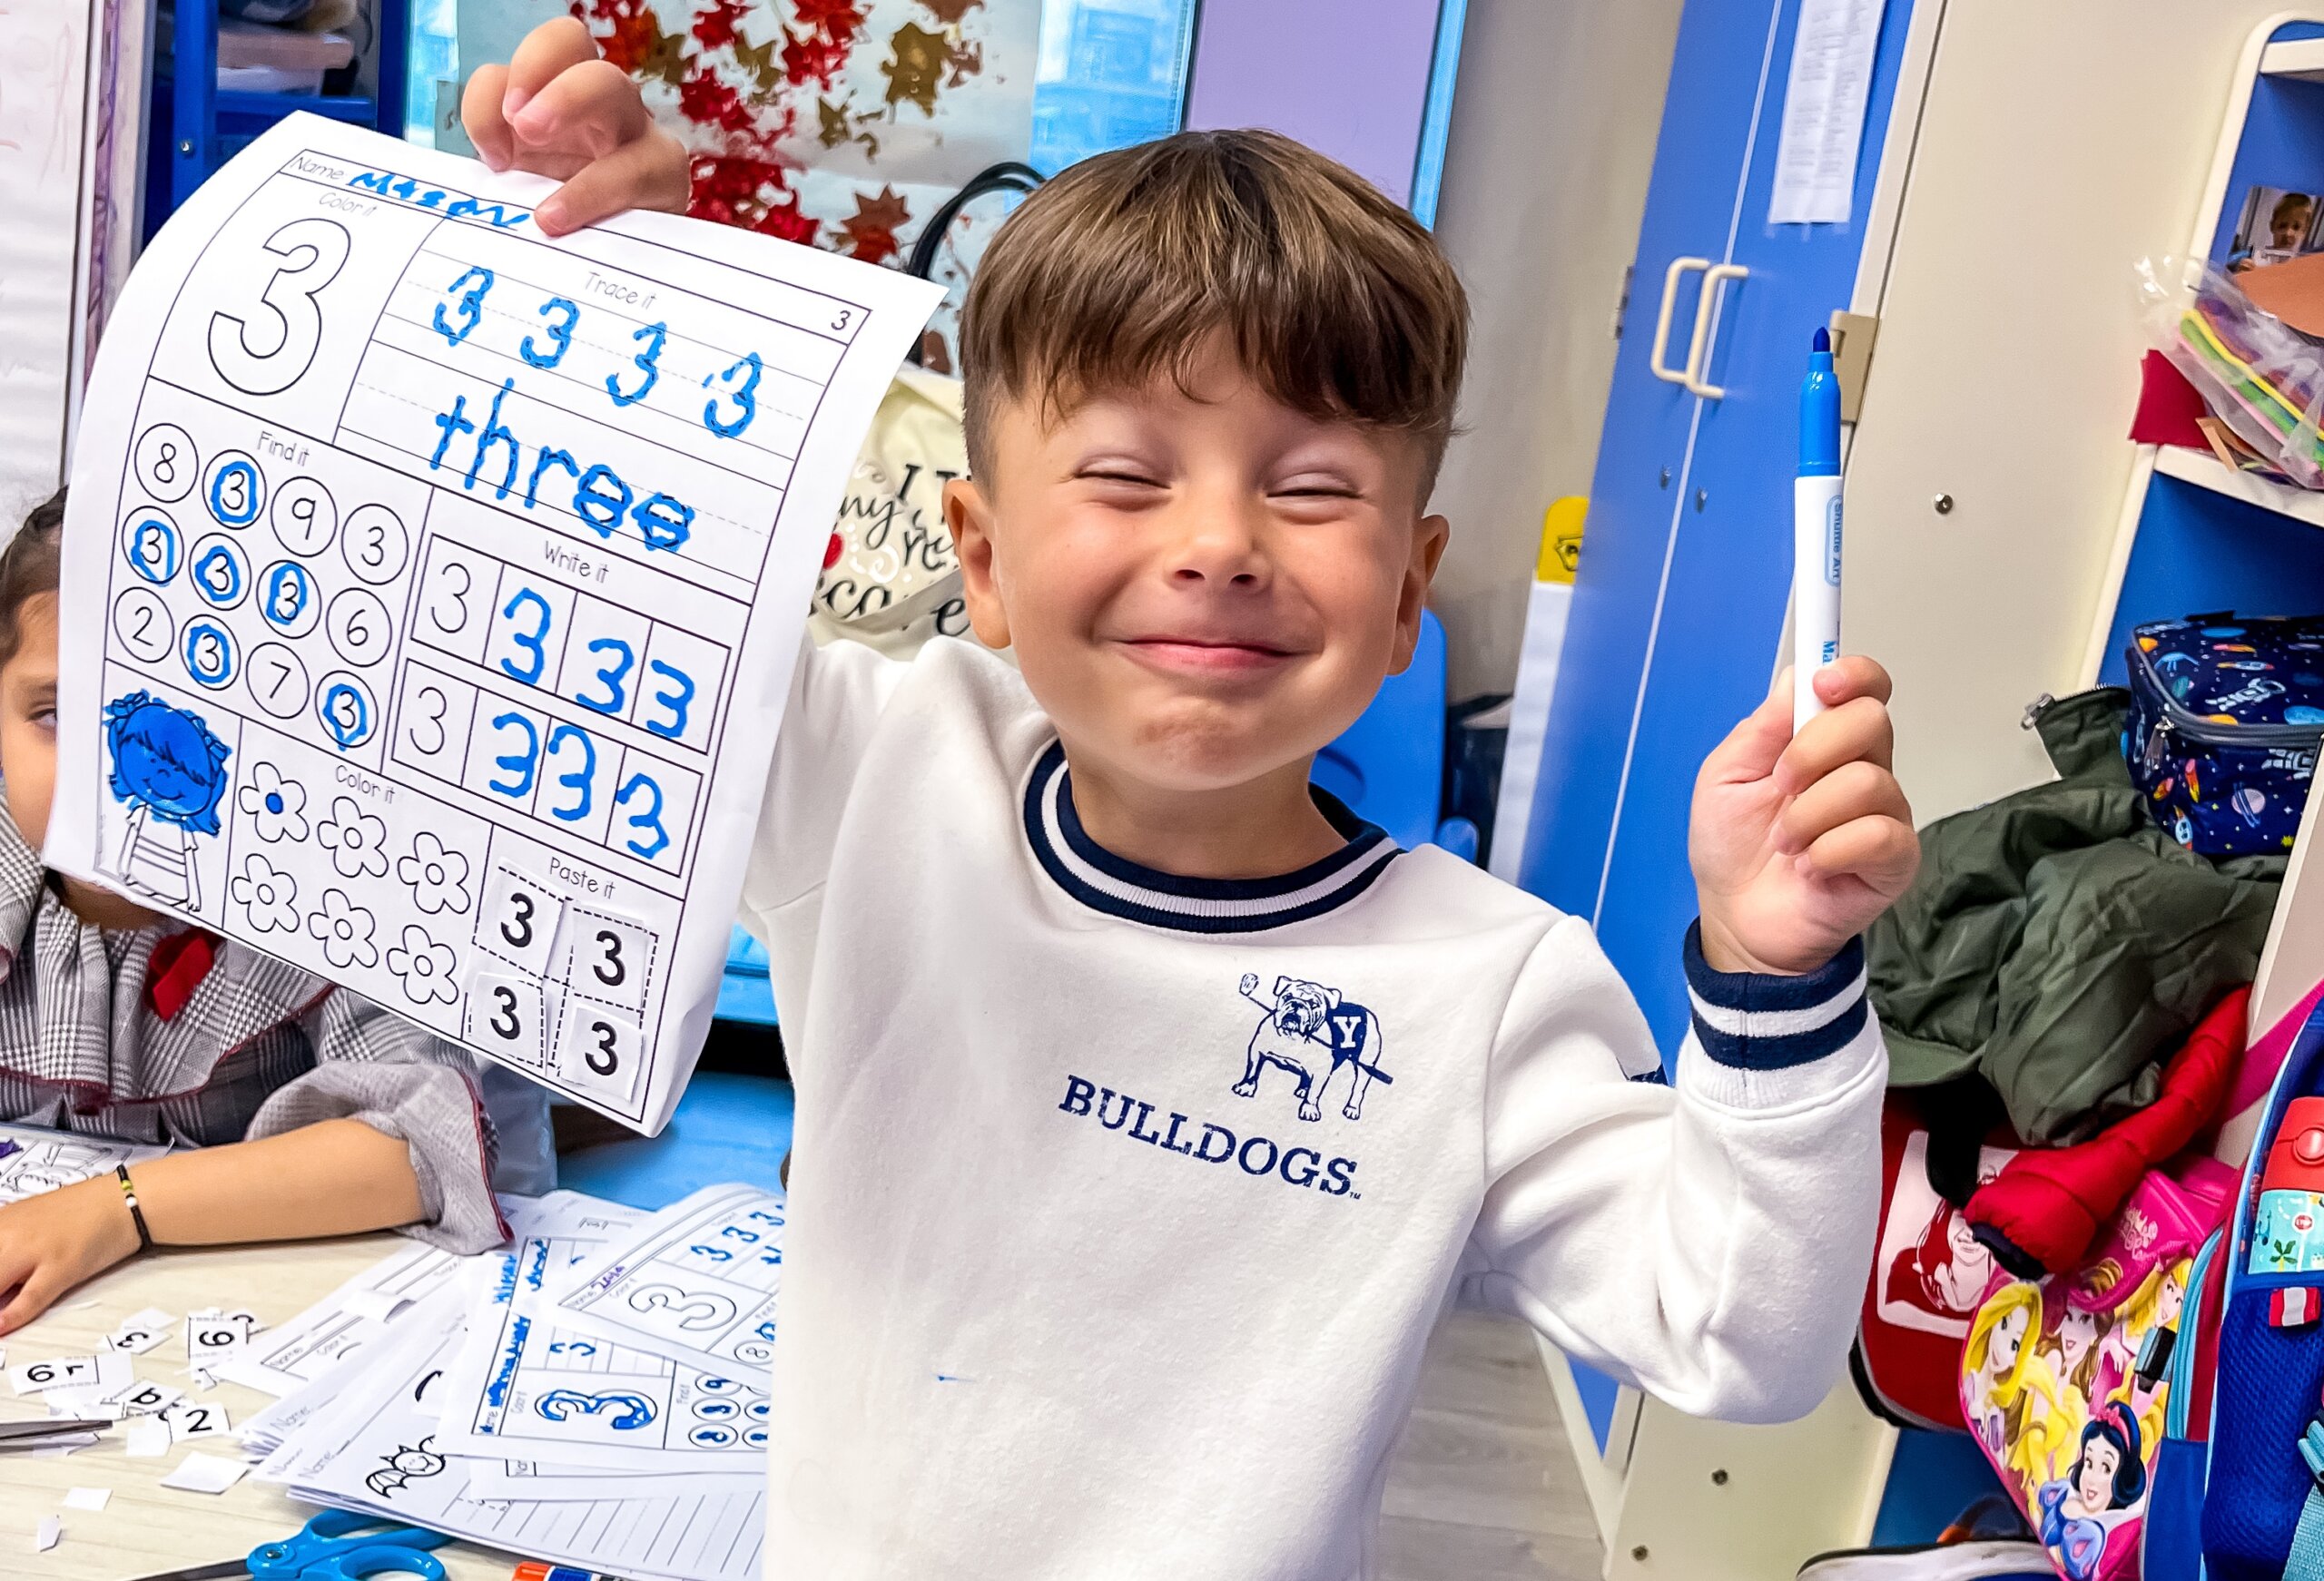 Happy child holding up a worksheet with the number three, showing his completed work in a classroom with educational materials and colorful decorations